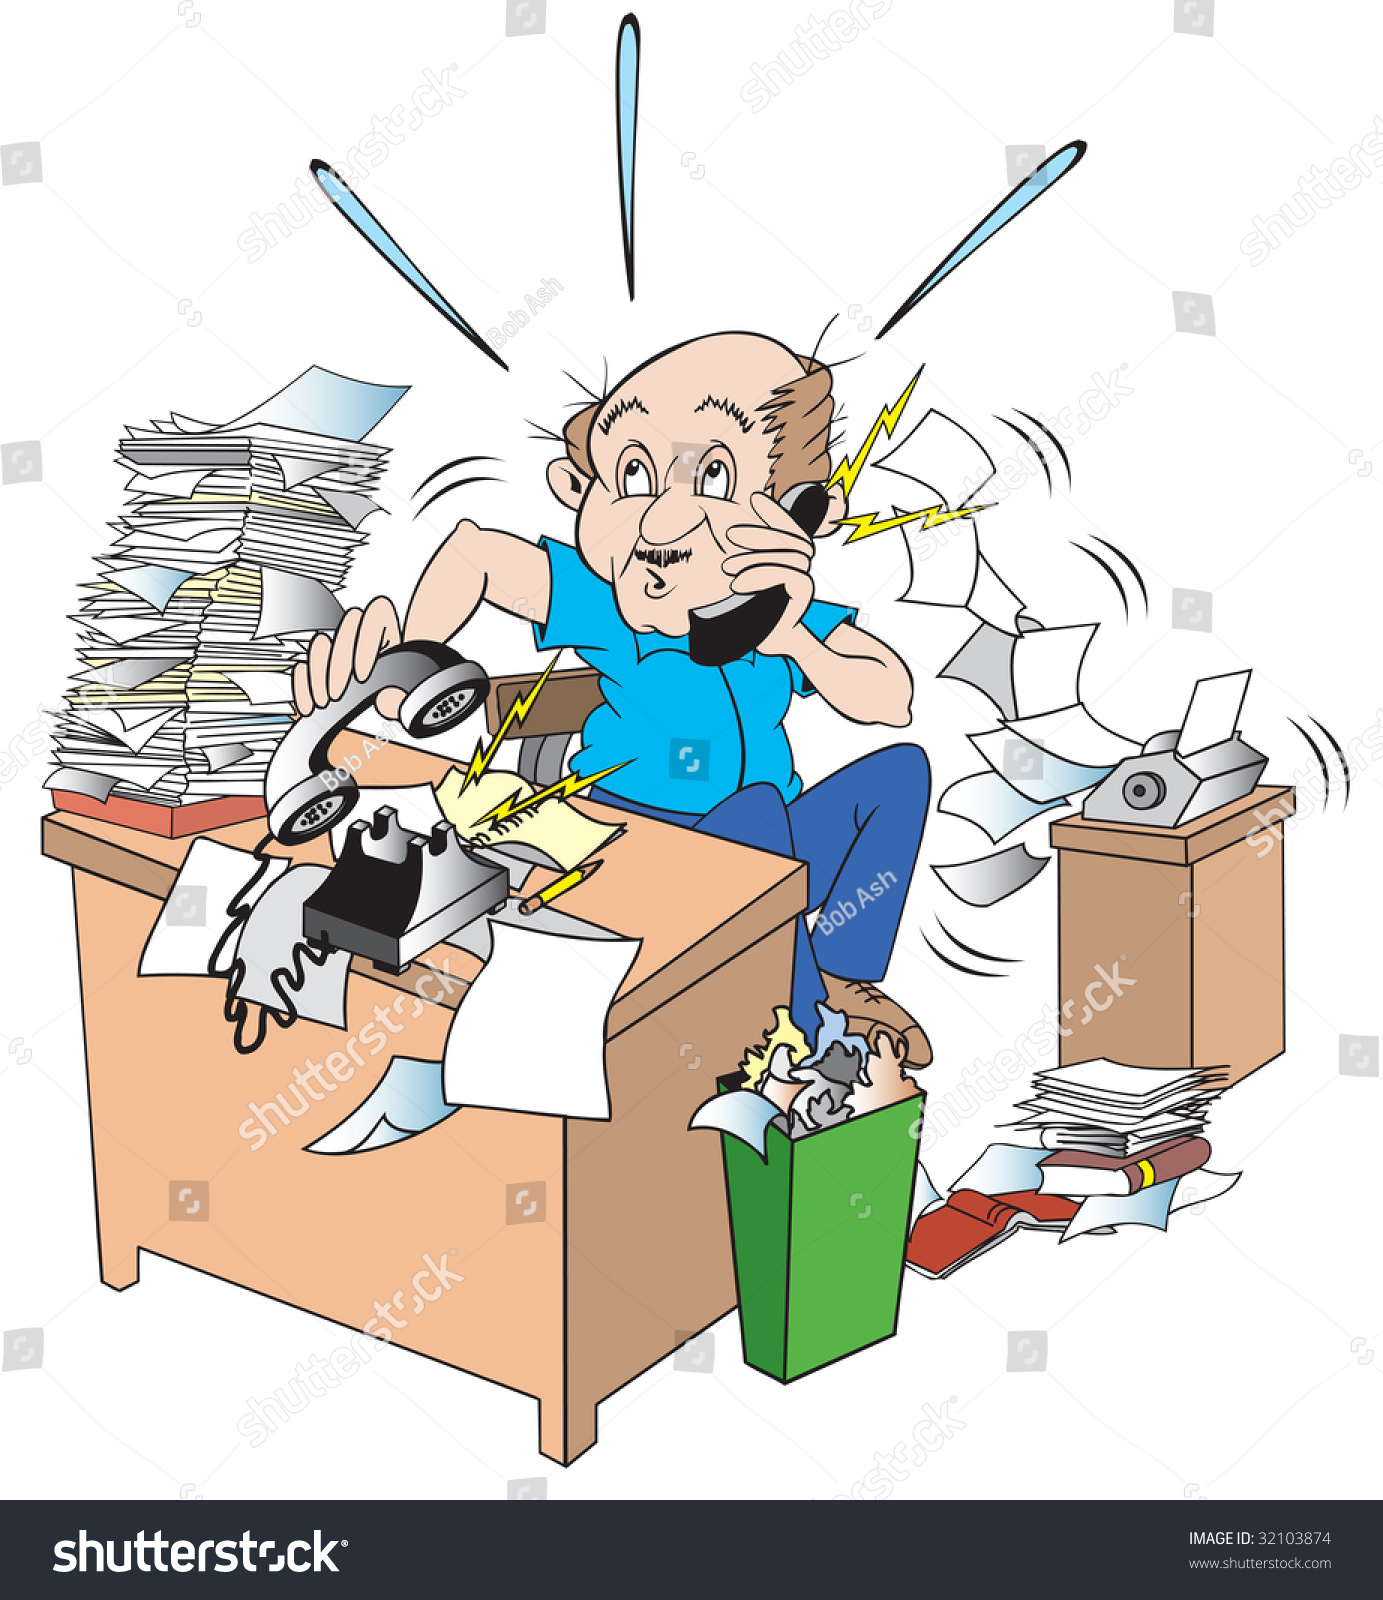 Cartoon Art Of A Man Trying To Answer Two Phones At Same Time. His Desk ...